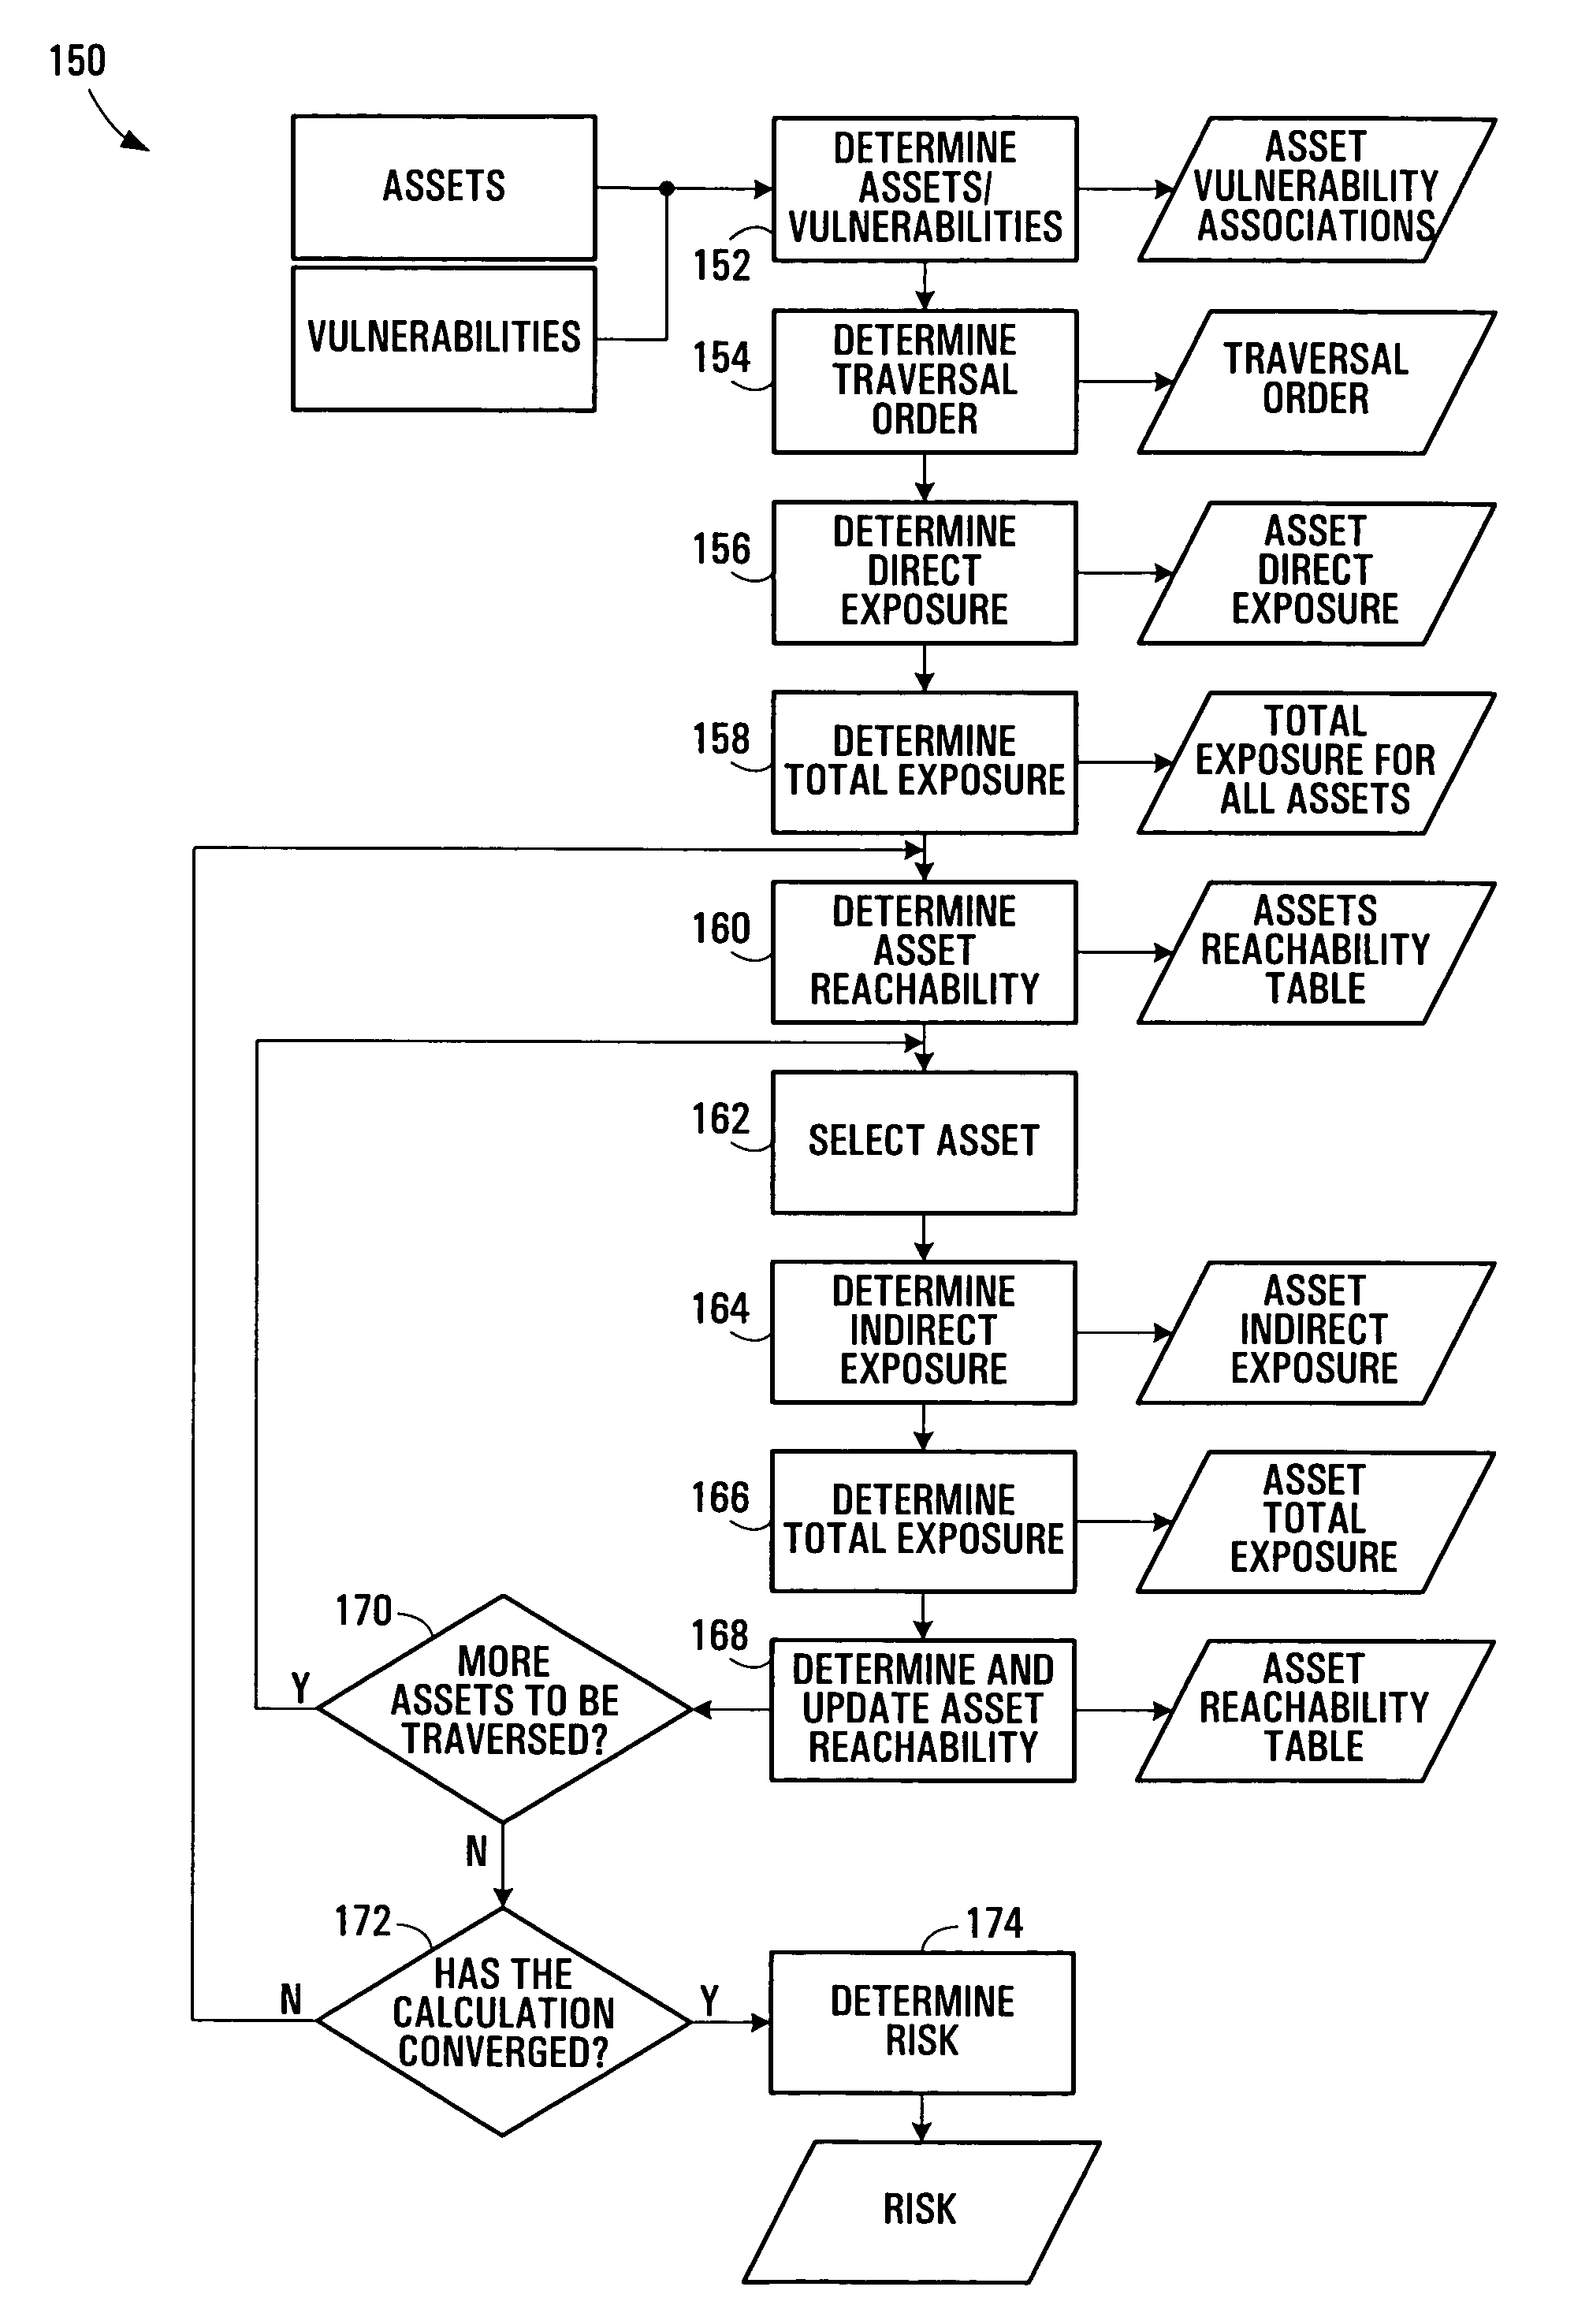 Communication network security risk exposure management systems and methods